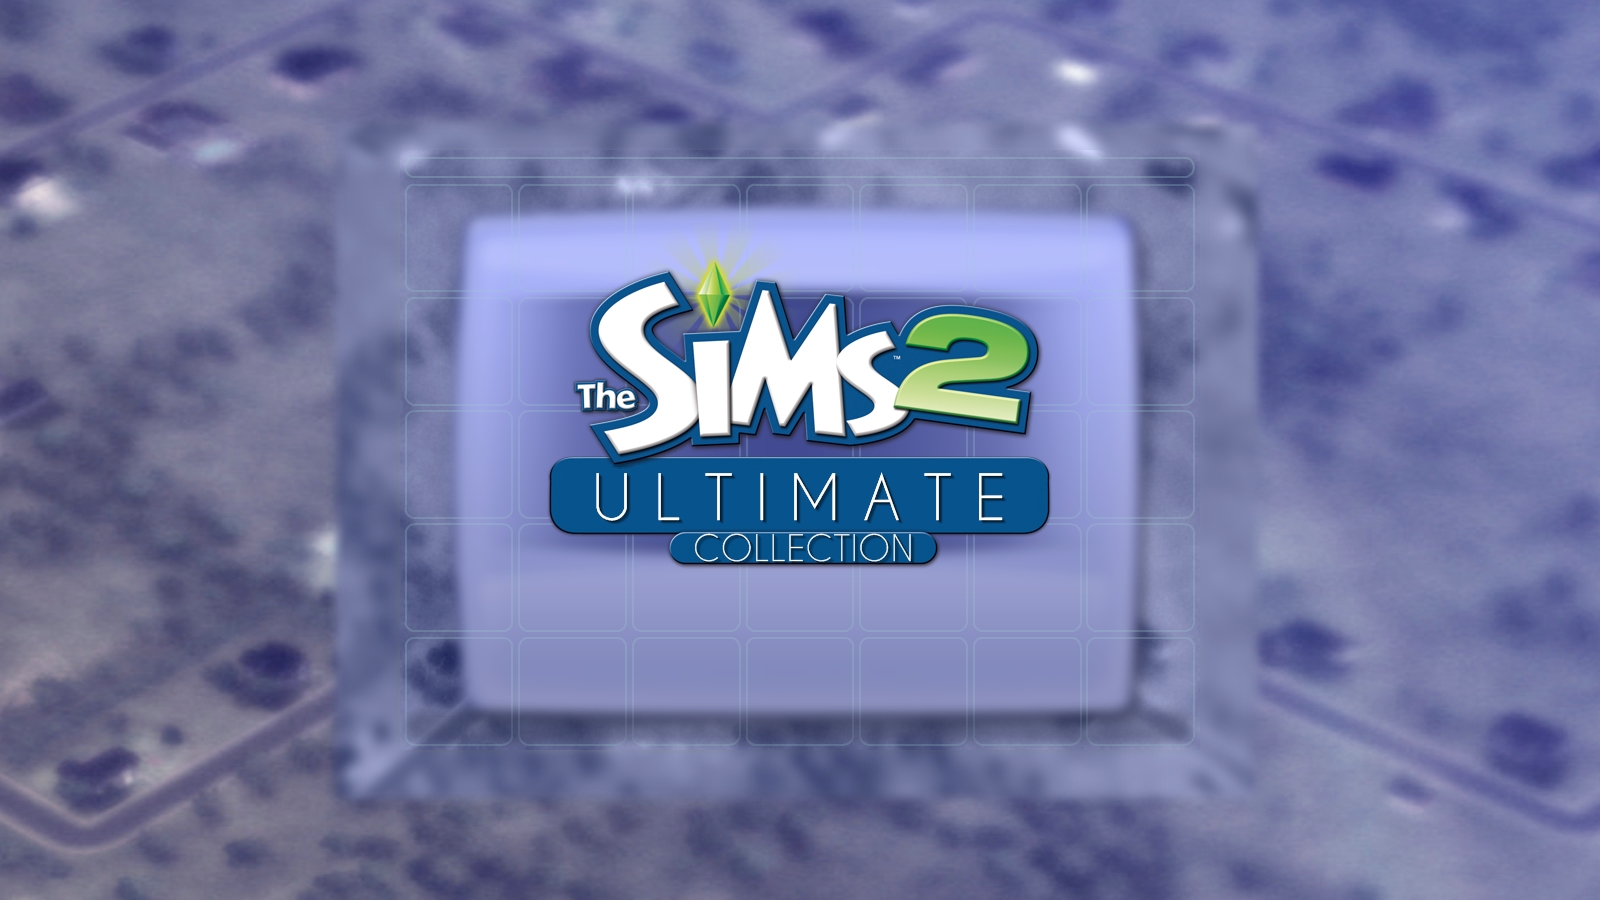 Sims 2 collection. The SIMS 2 Ultimate collection. Симс 2 ультимейт коллекшн. Симс 2 логотип. The SIMS 2 Ultimate collection 2014.